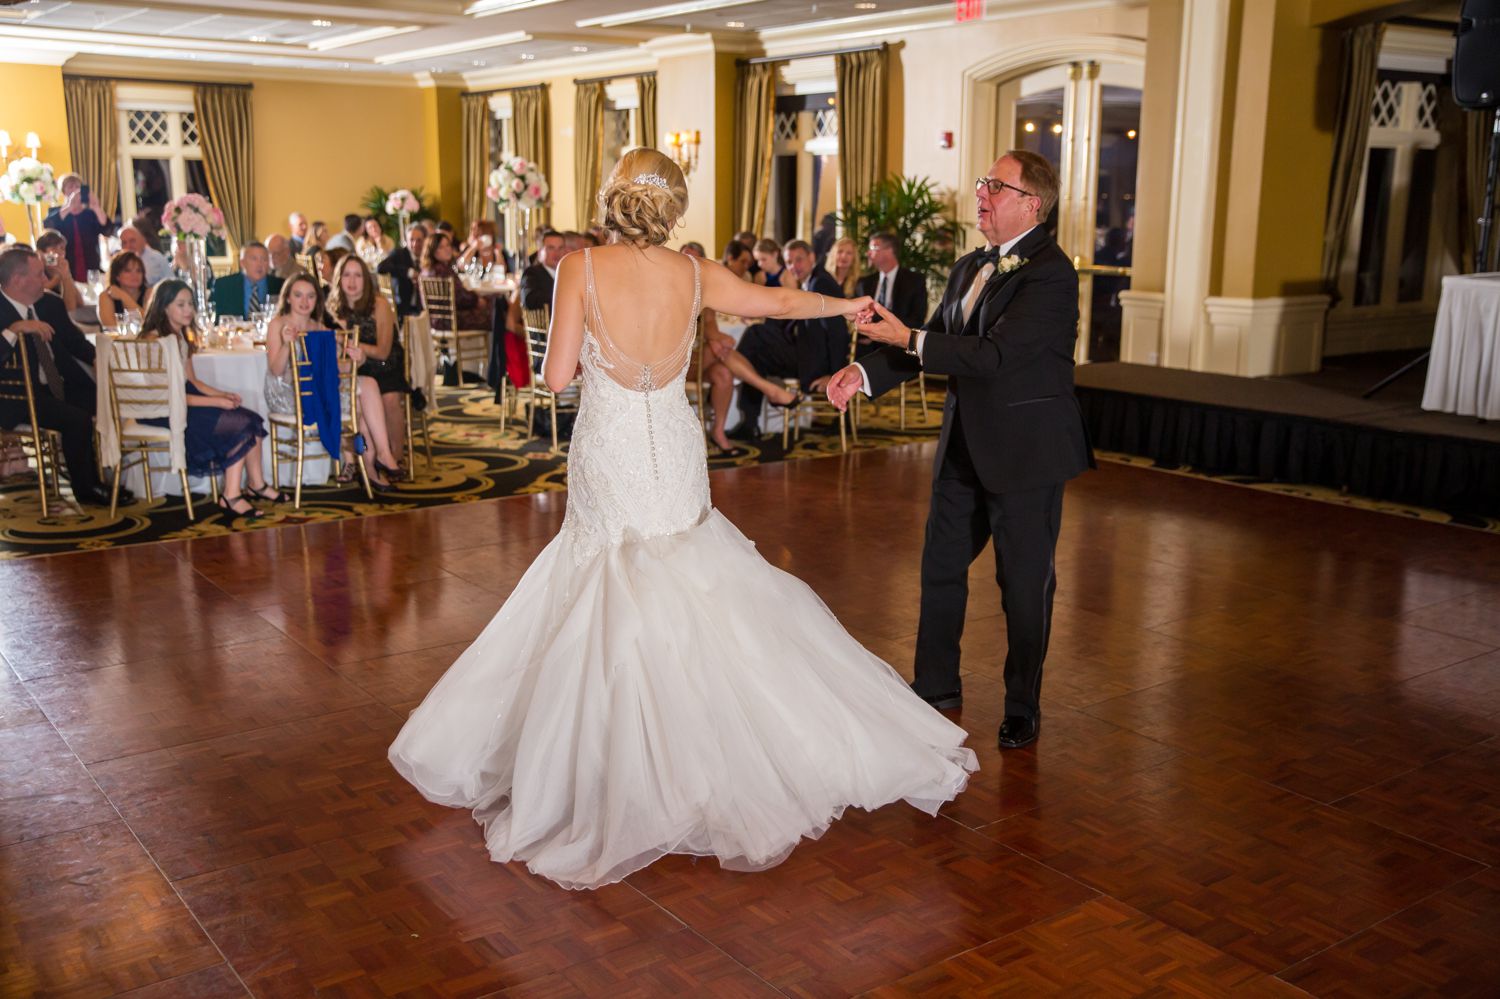 Chrissy and Joe - A Butterfield Country Club Wedding 60